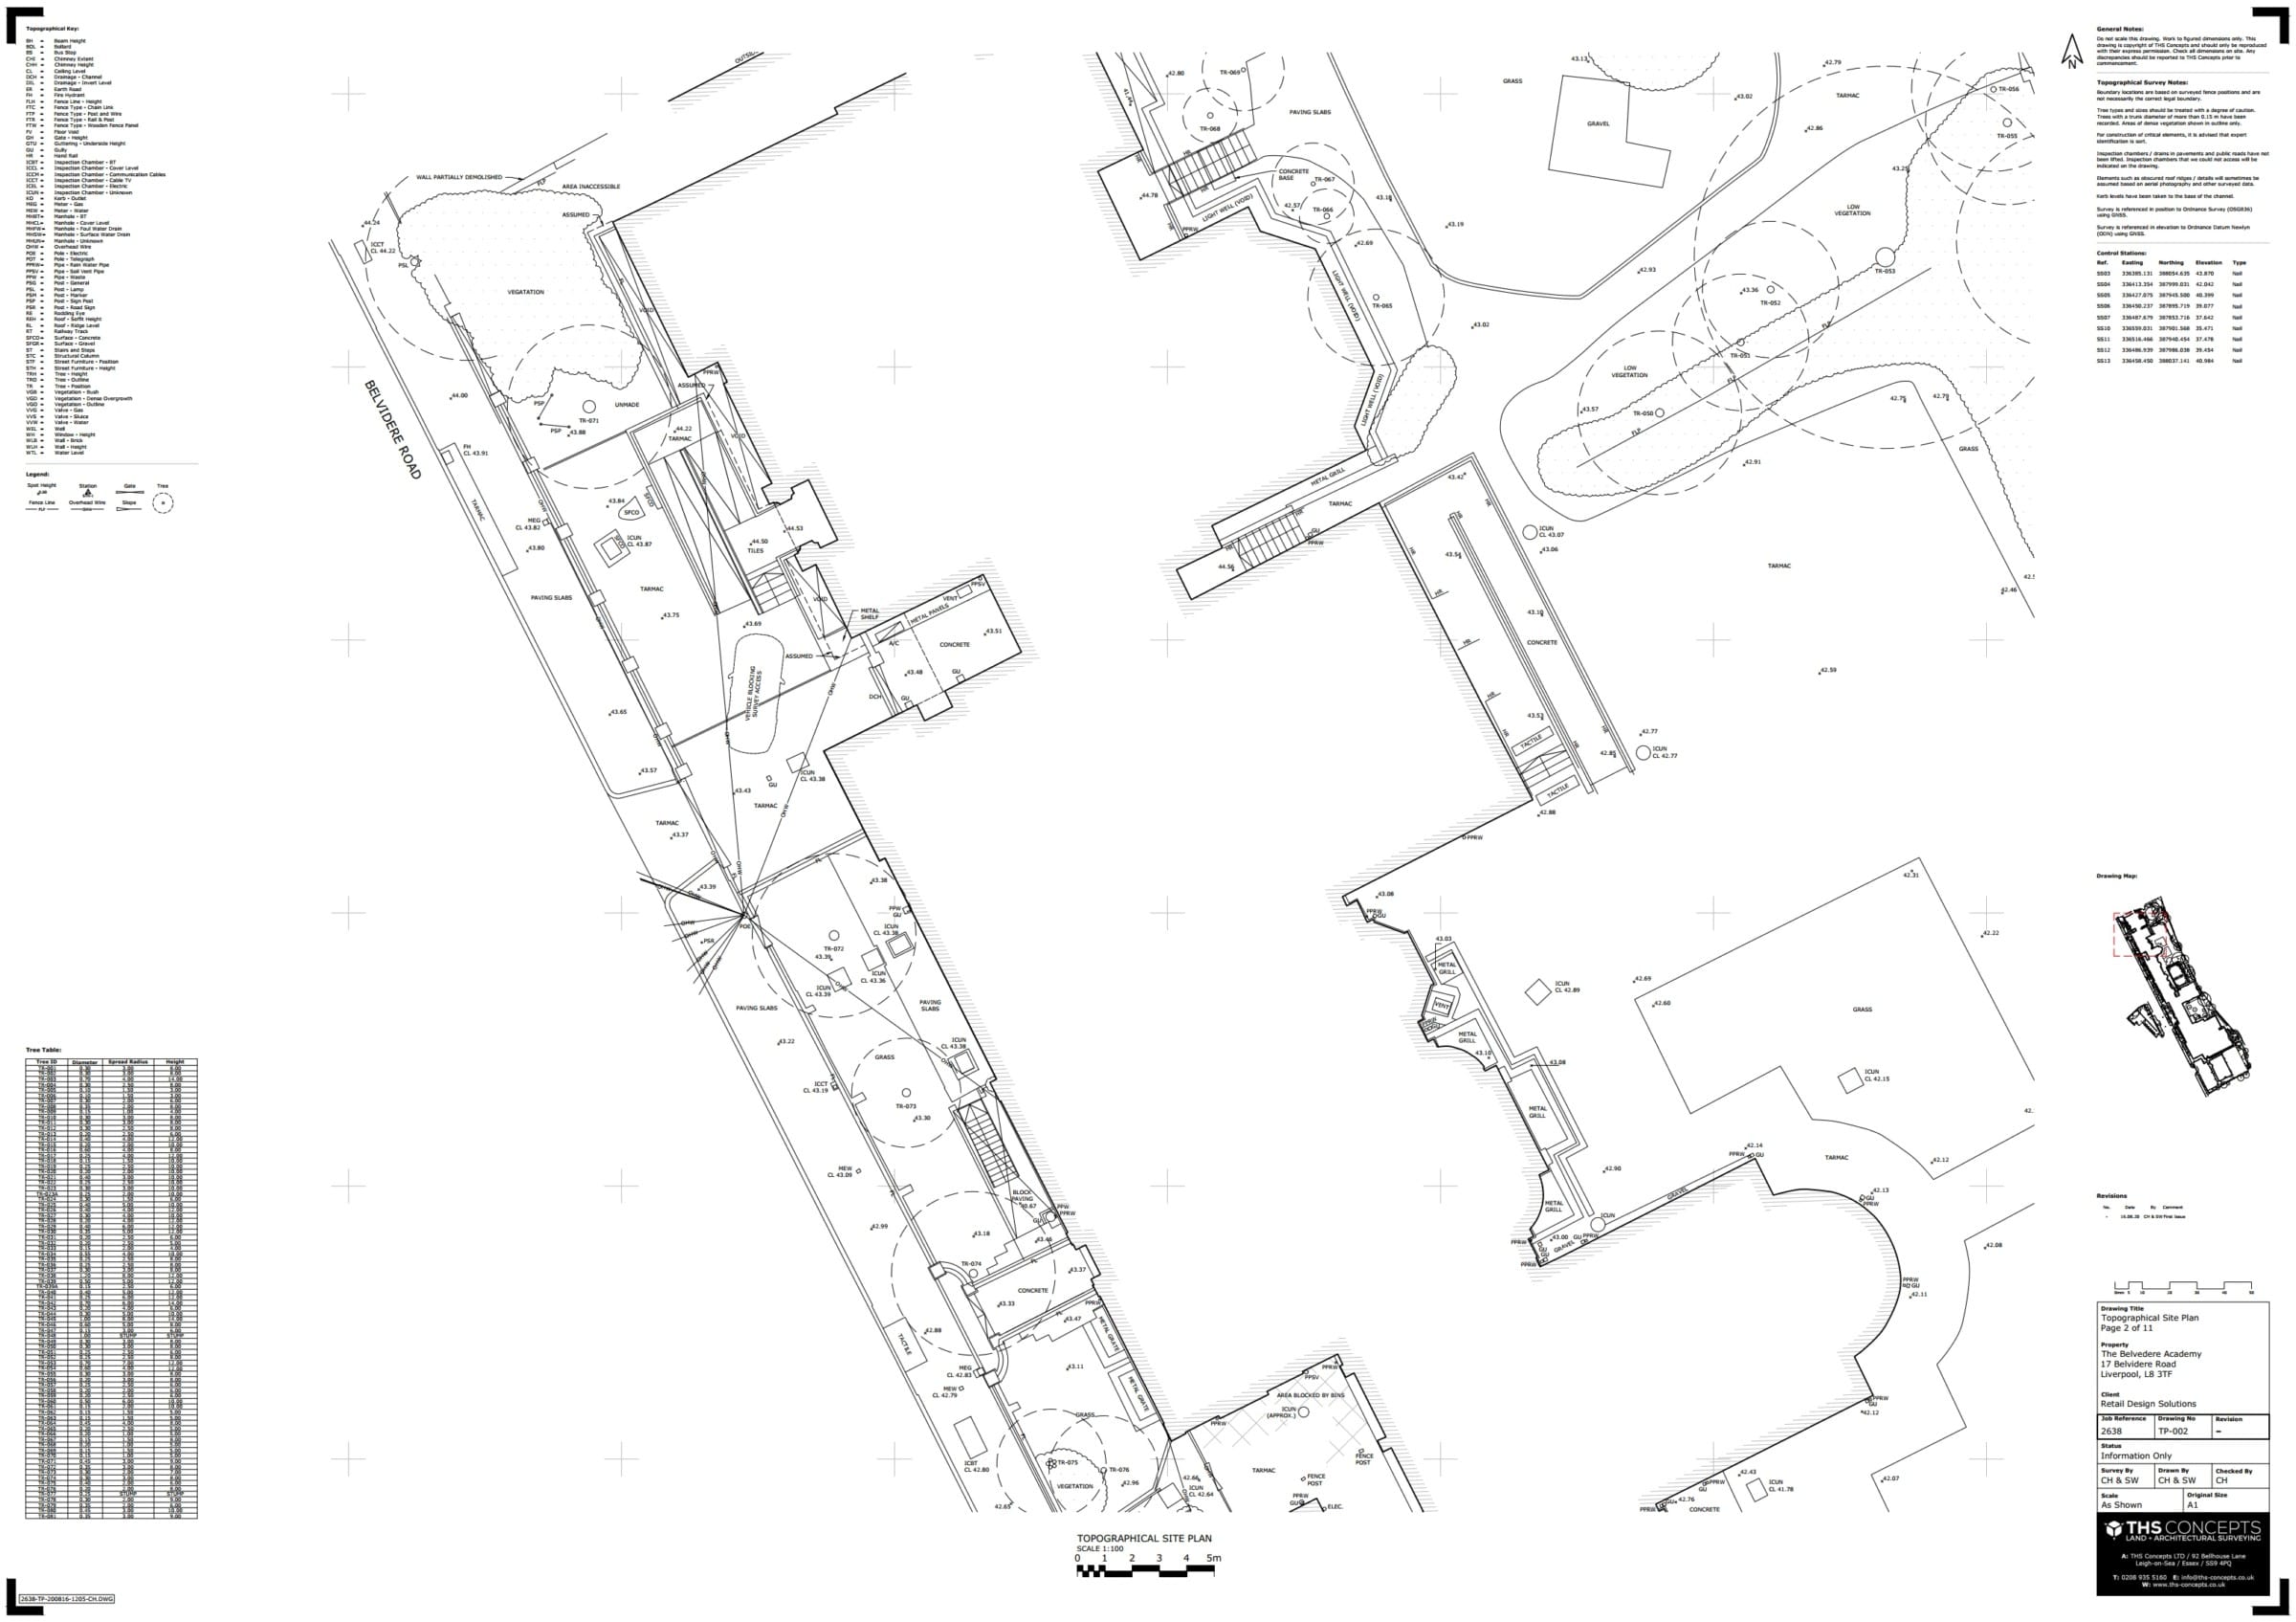 Liverpool High School Topographical Survey